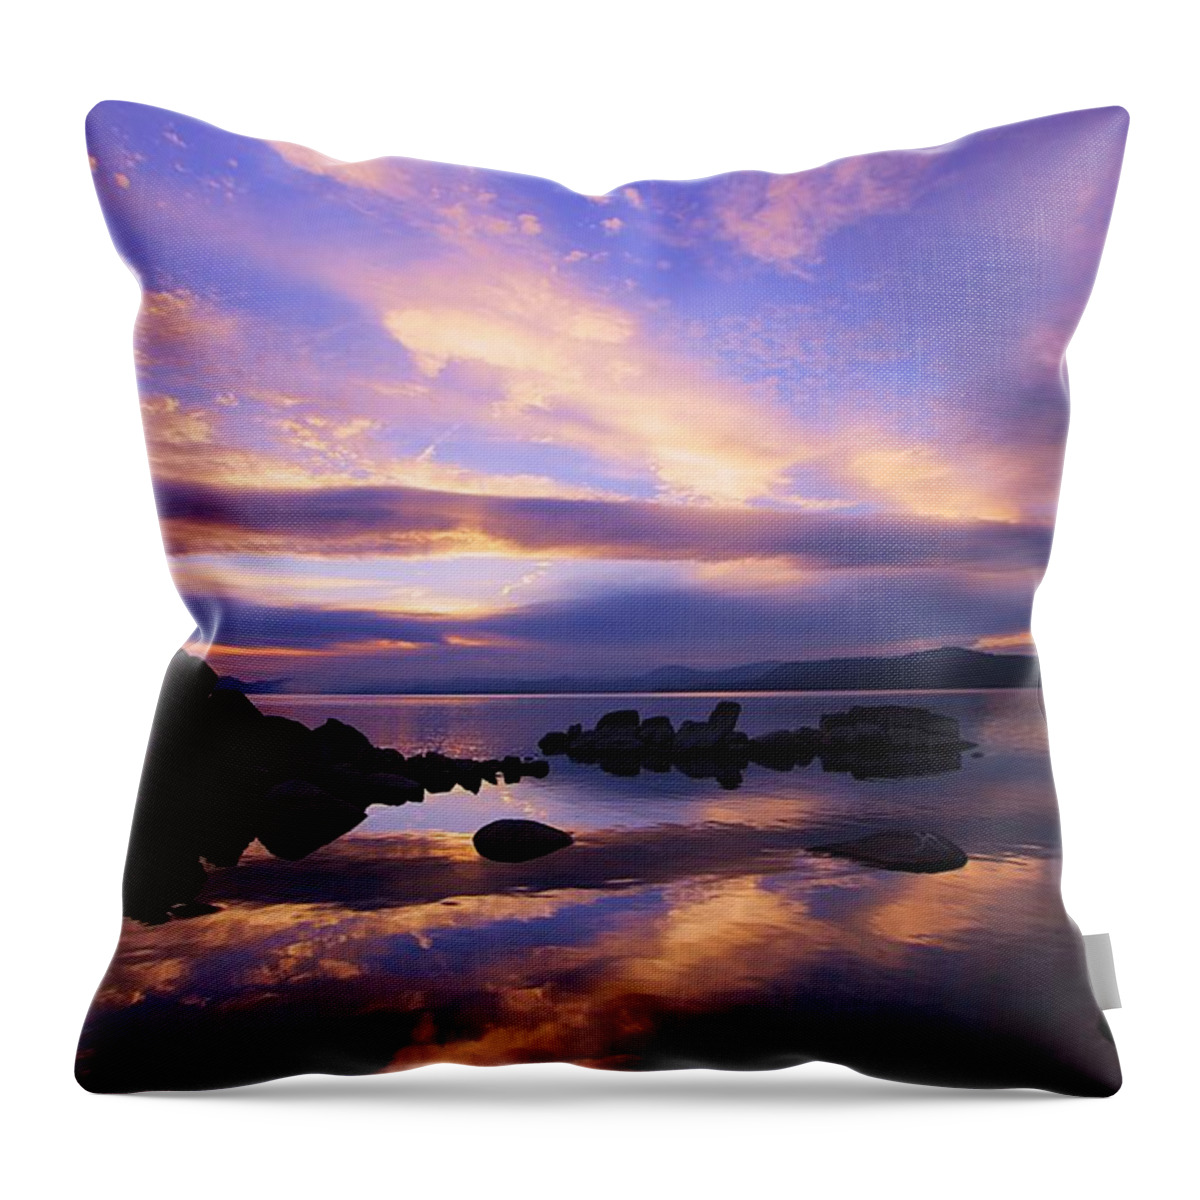 Lake Tahoe Throw Pillow featuring the photograph Hidden Beach Sunset Surprise by Sean Sarsfield